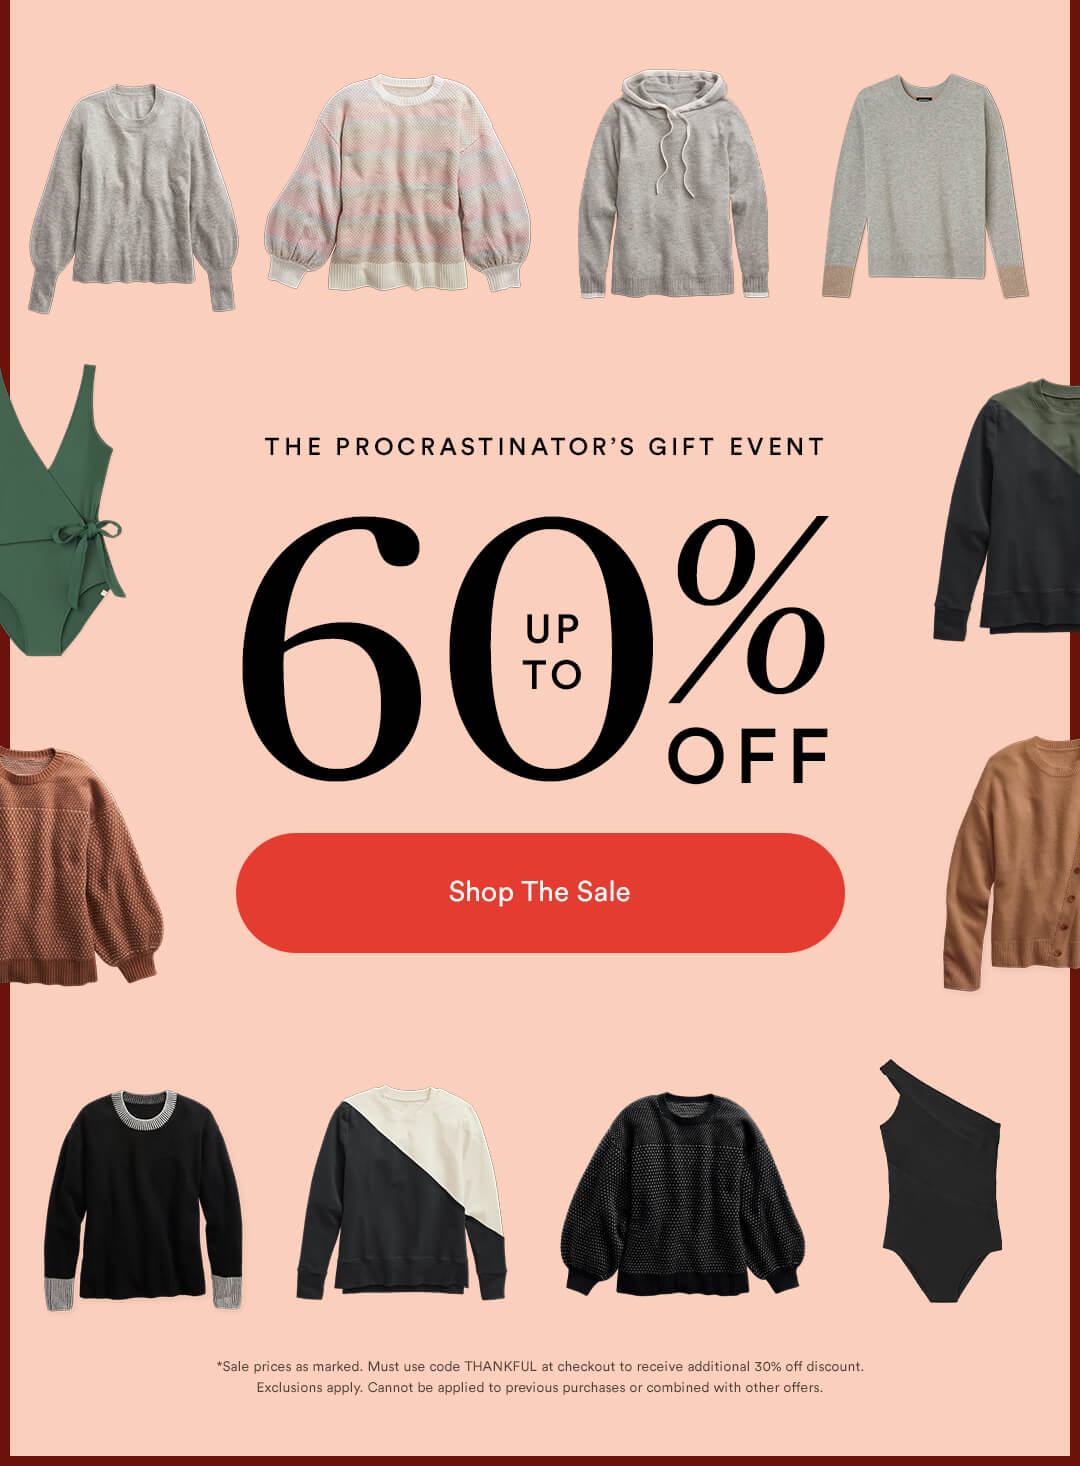 The Procrastinator Gift Event - Up to 60% off. Peach block with Summersalt apparel flatlay images around border.